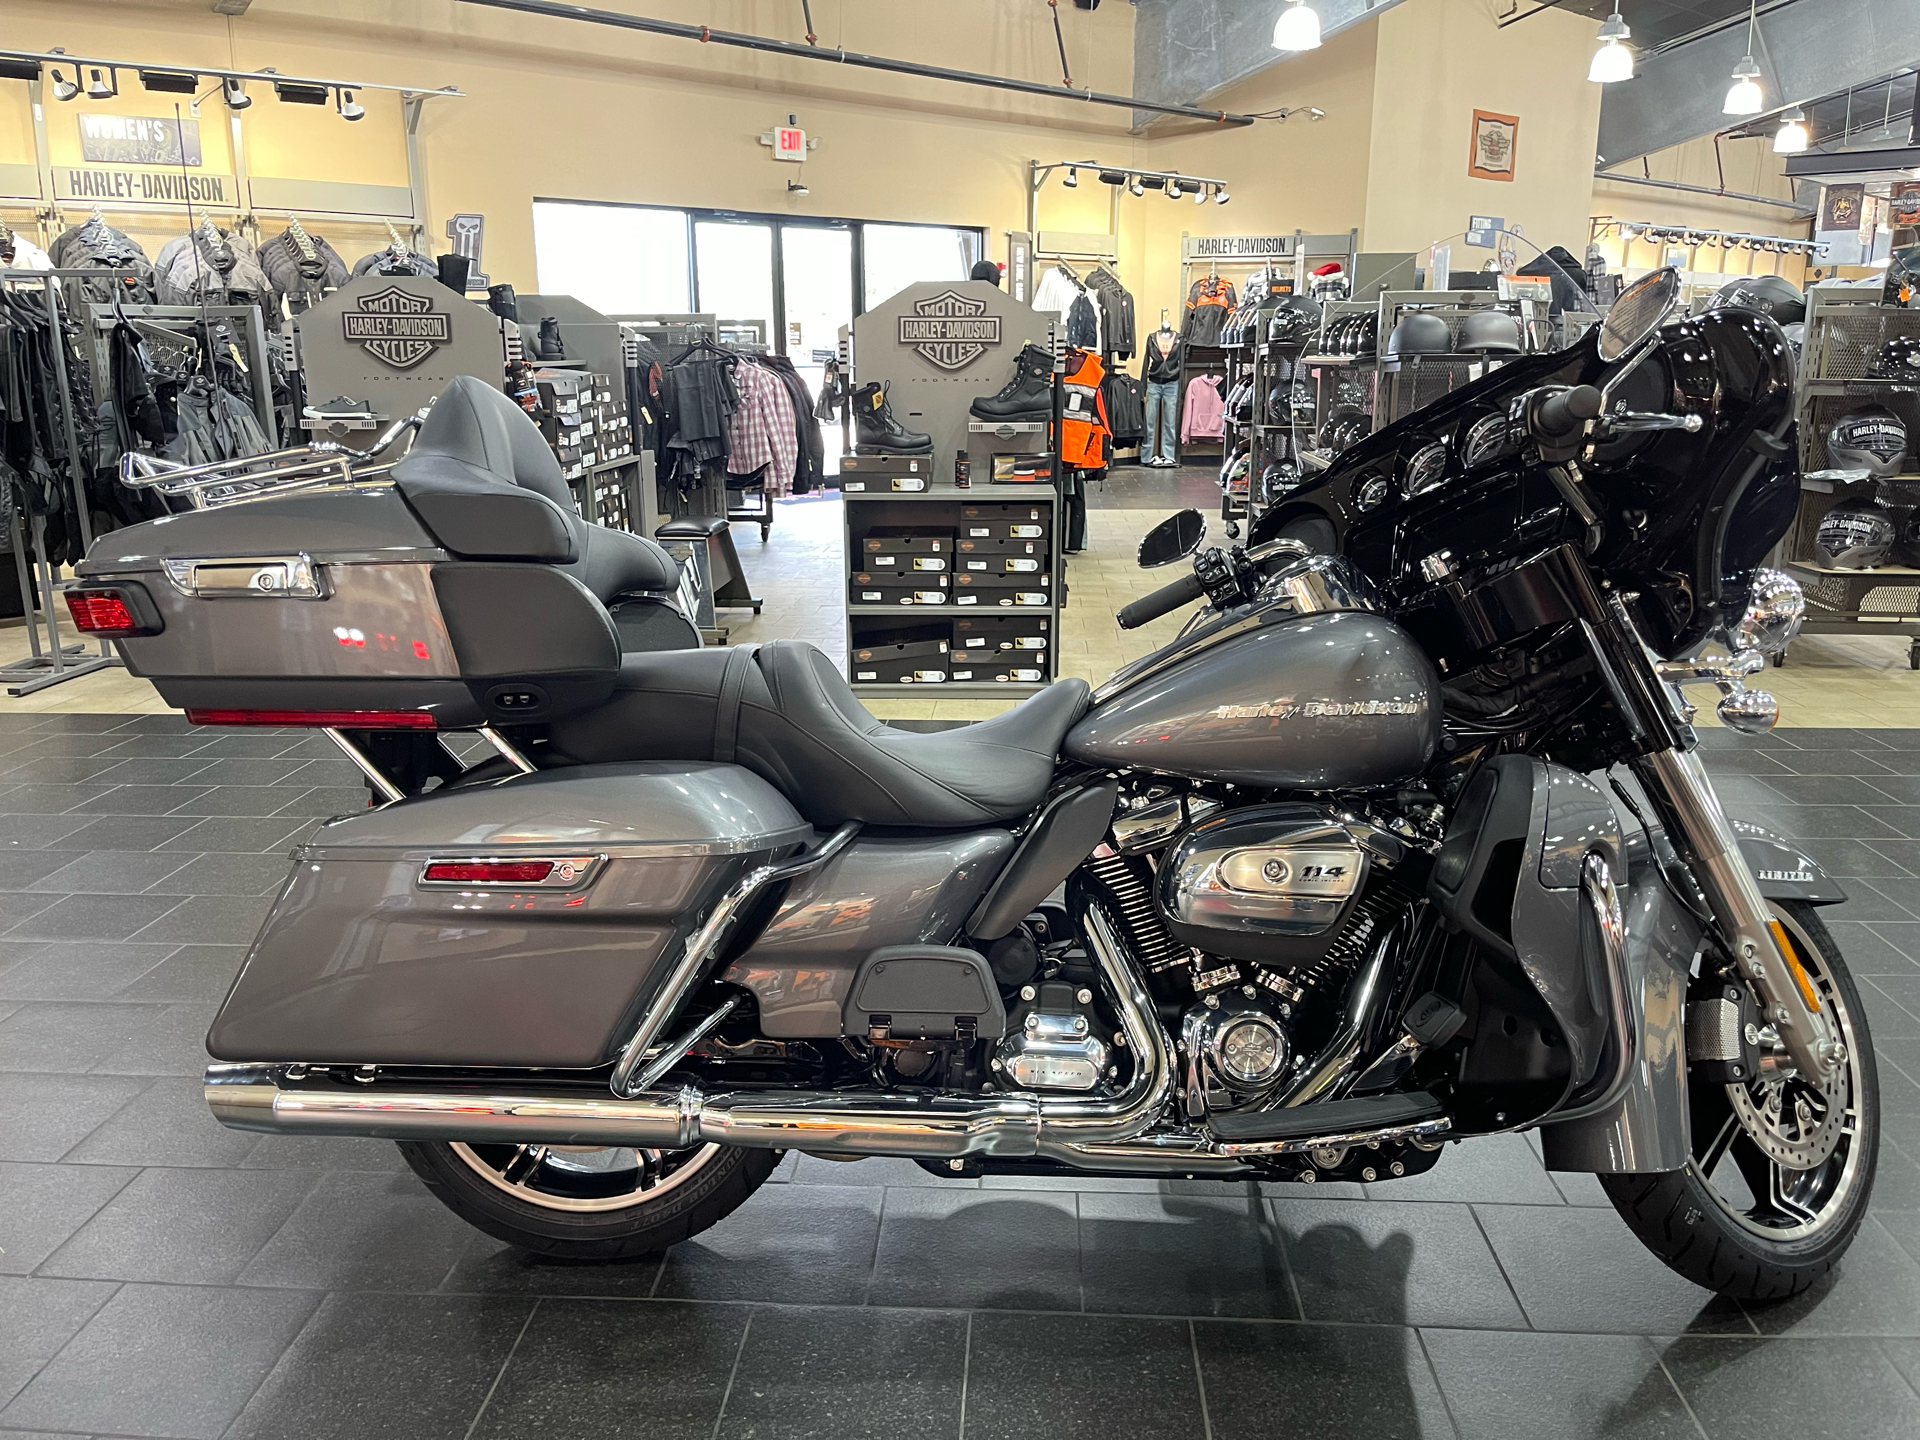 2022 Harley-Davidson Ultra Limited in The Woodlands, Texas - Photo 1